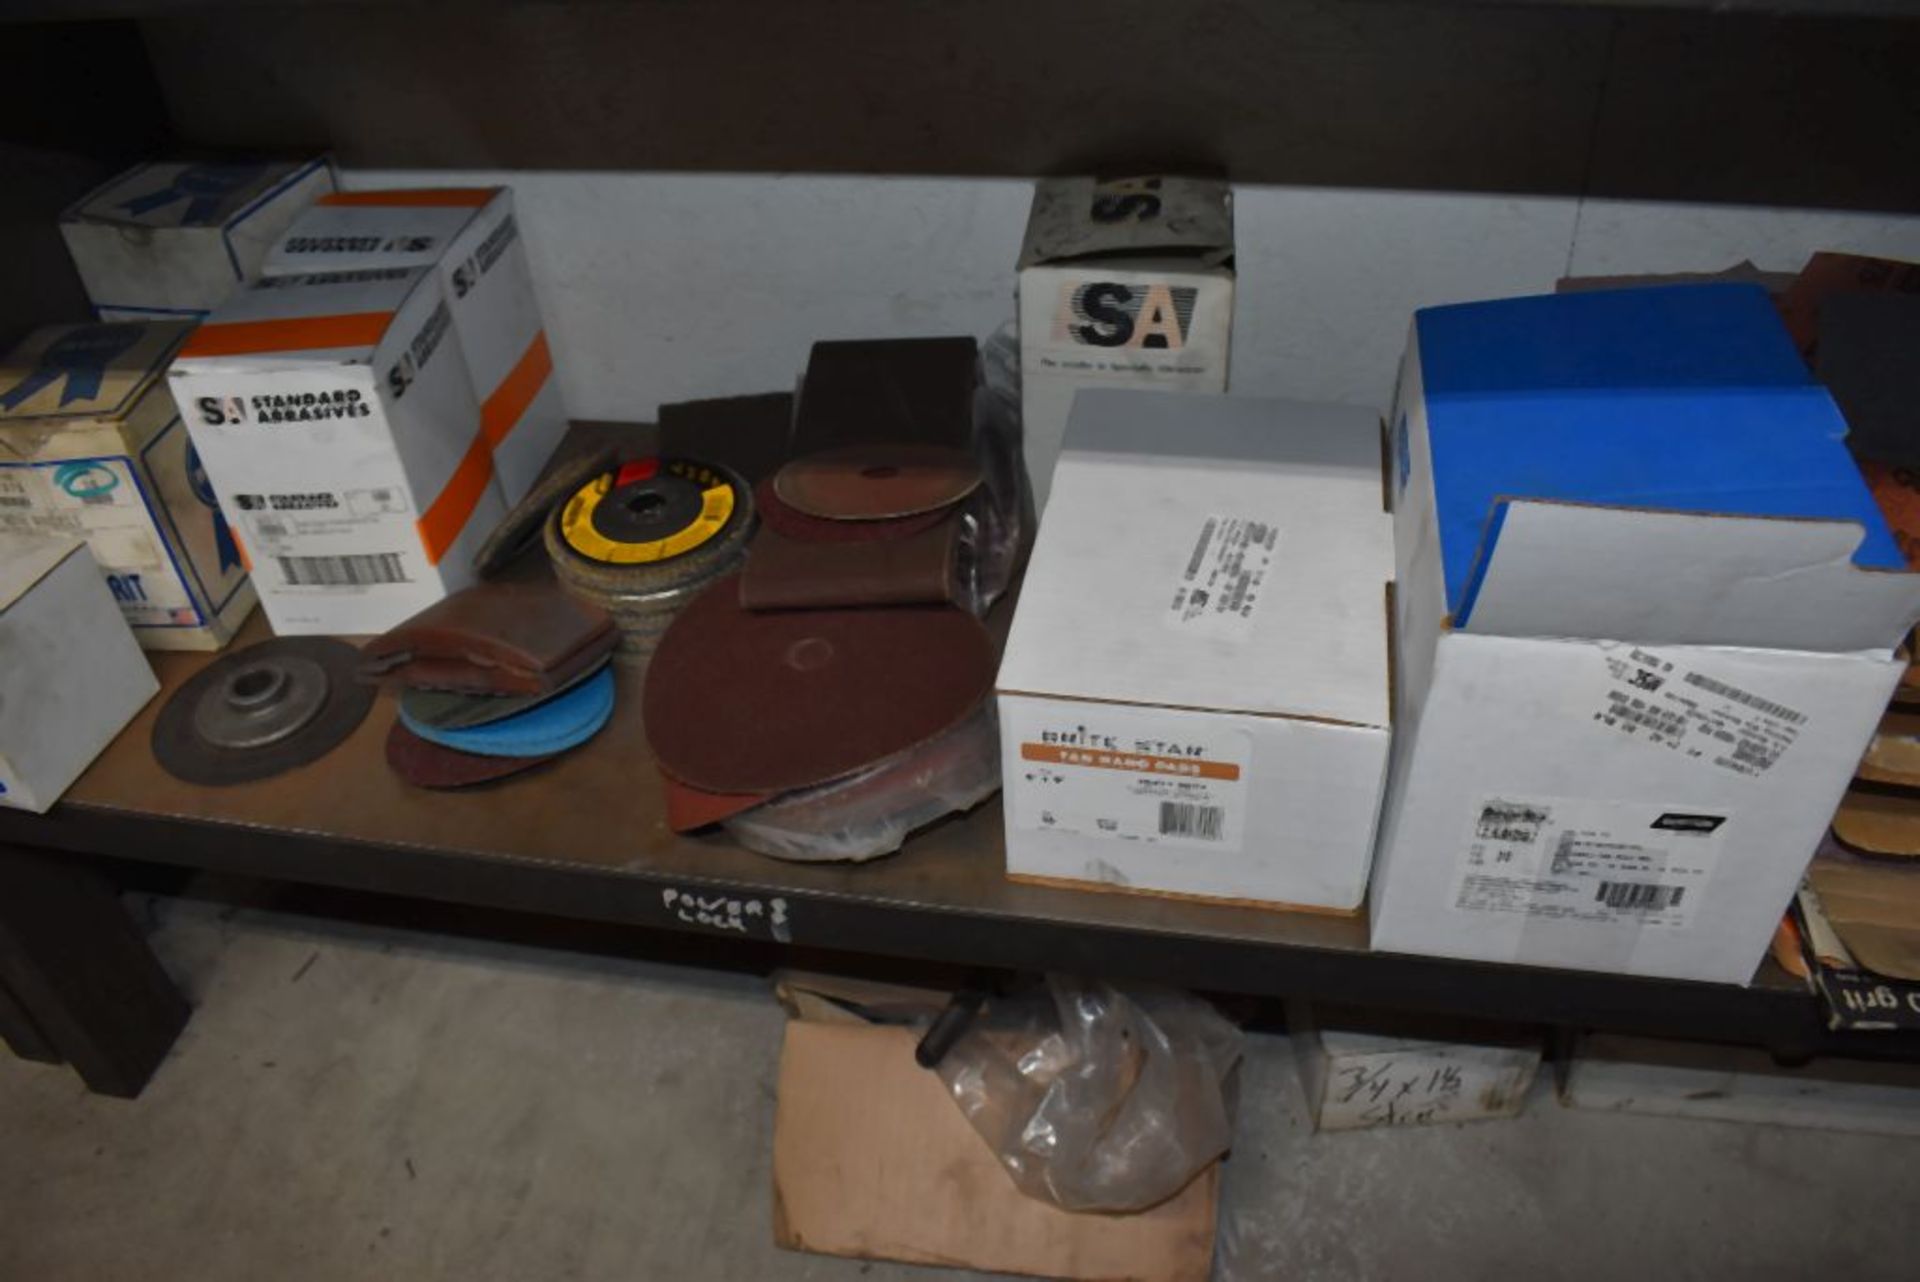 HEAVY DUTY STEEL SHELVING UNIT WITH ASSORTED ABRASIVES, HARDWARE UNDERNEATH AND MISC. ON SHELVE - Image 2 of 4